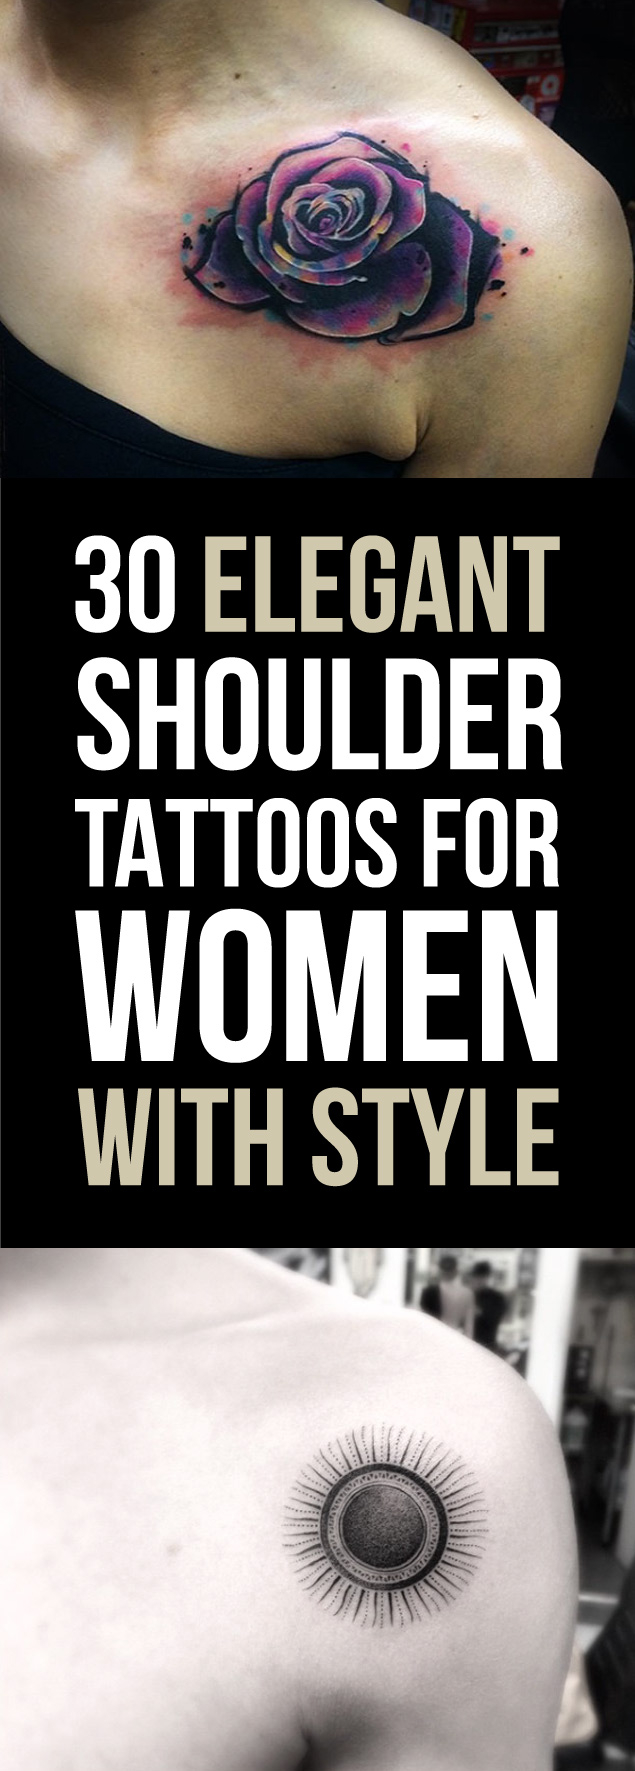 30 Elegant Shoulder Tattoos For Women With Style Tattooblend with regard to size 635 X 1771